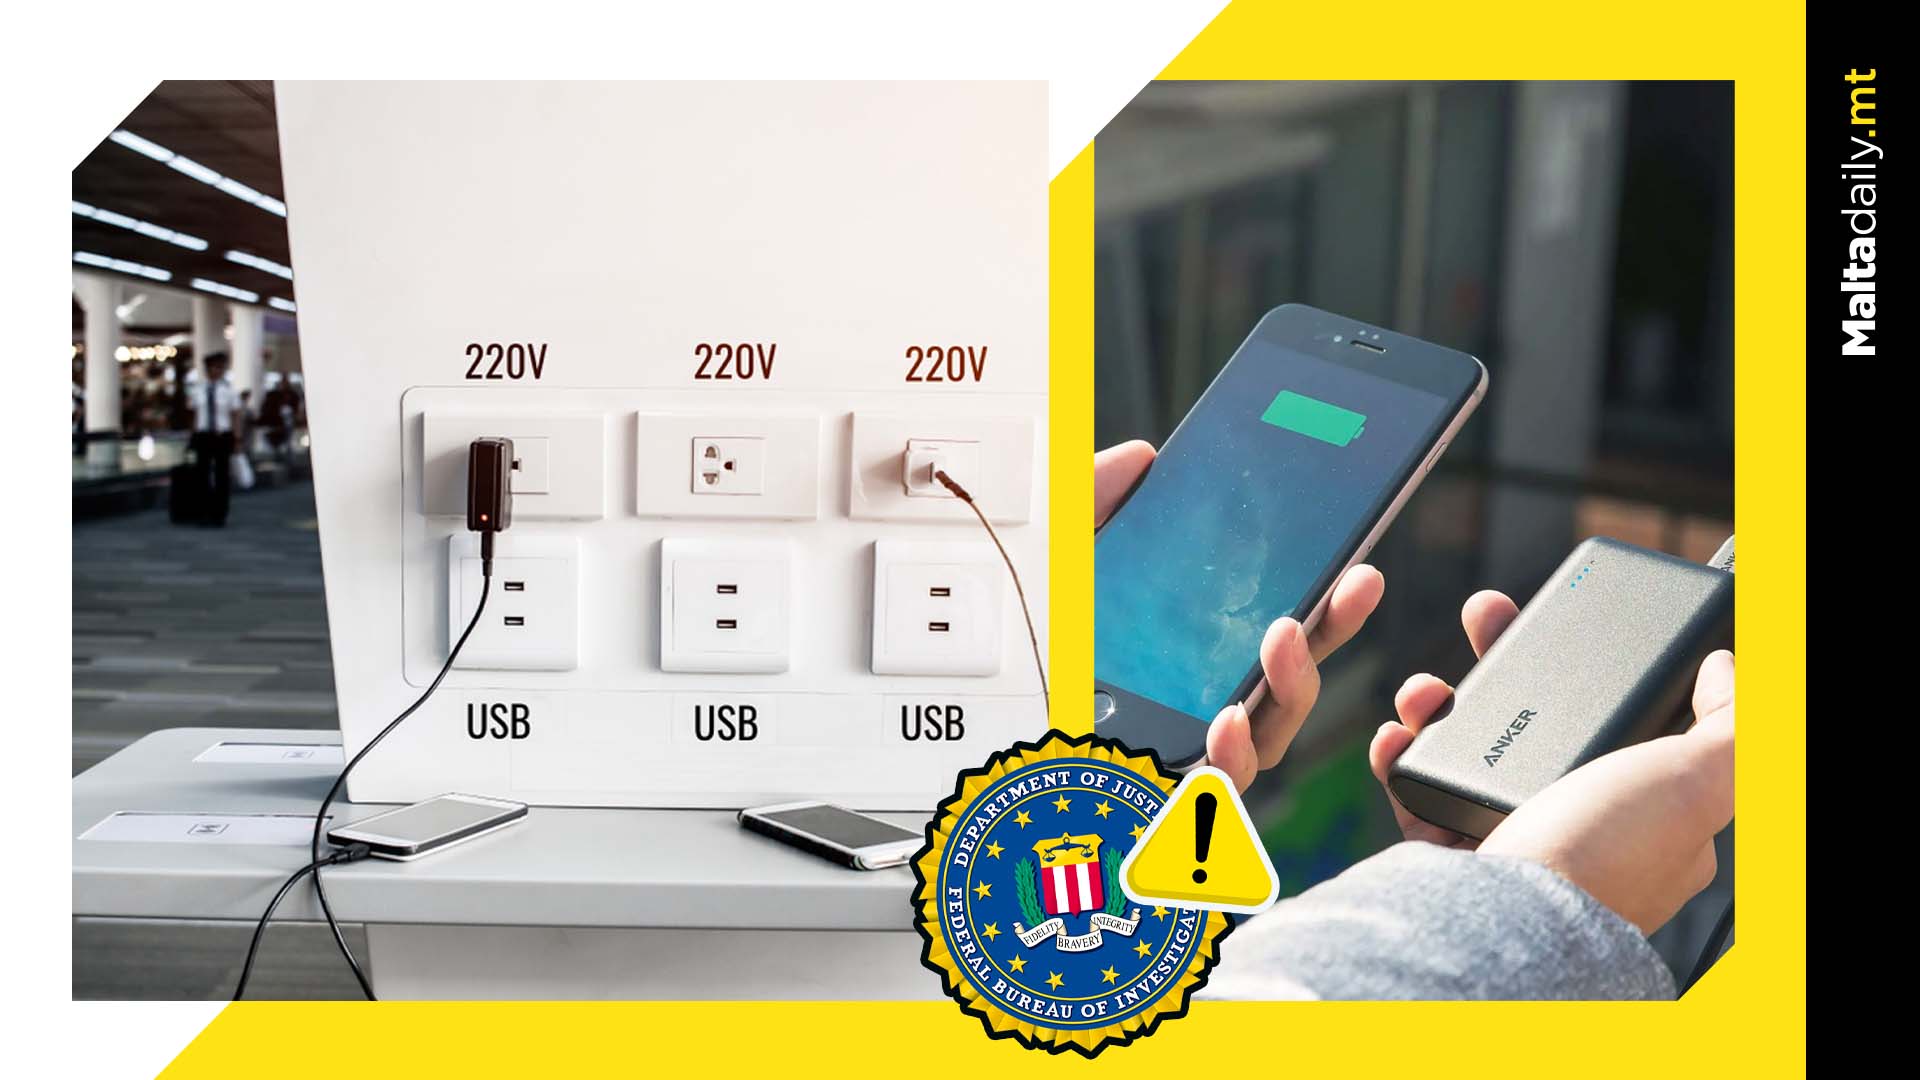 FBI warns against charging phones from public stations